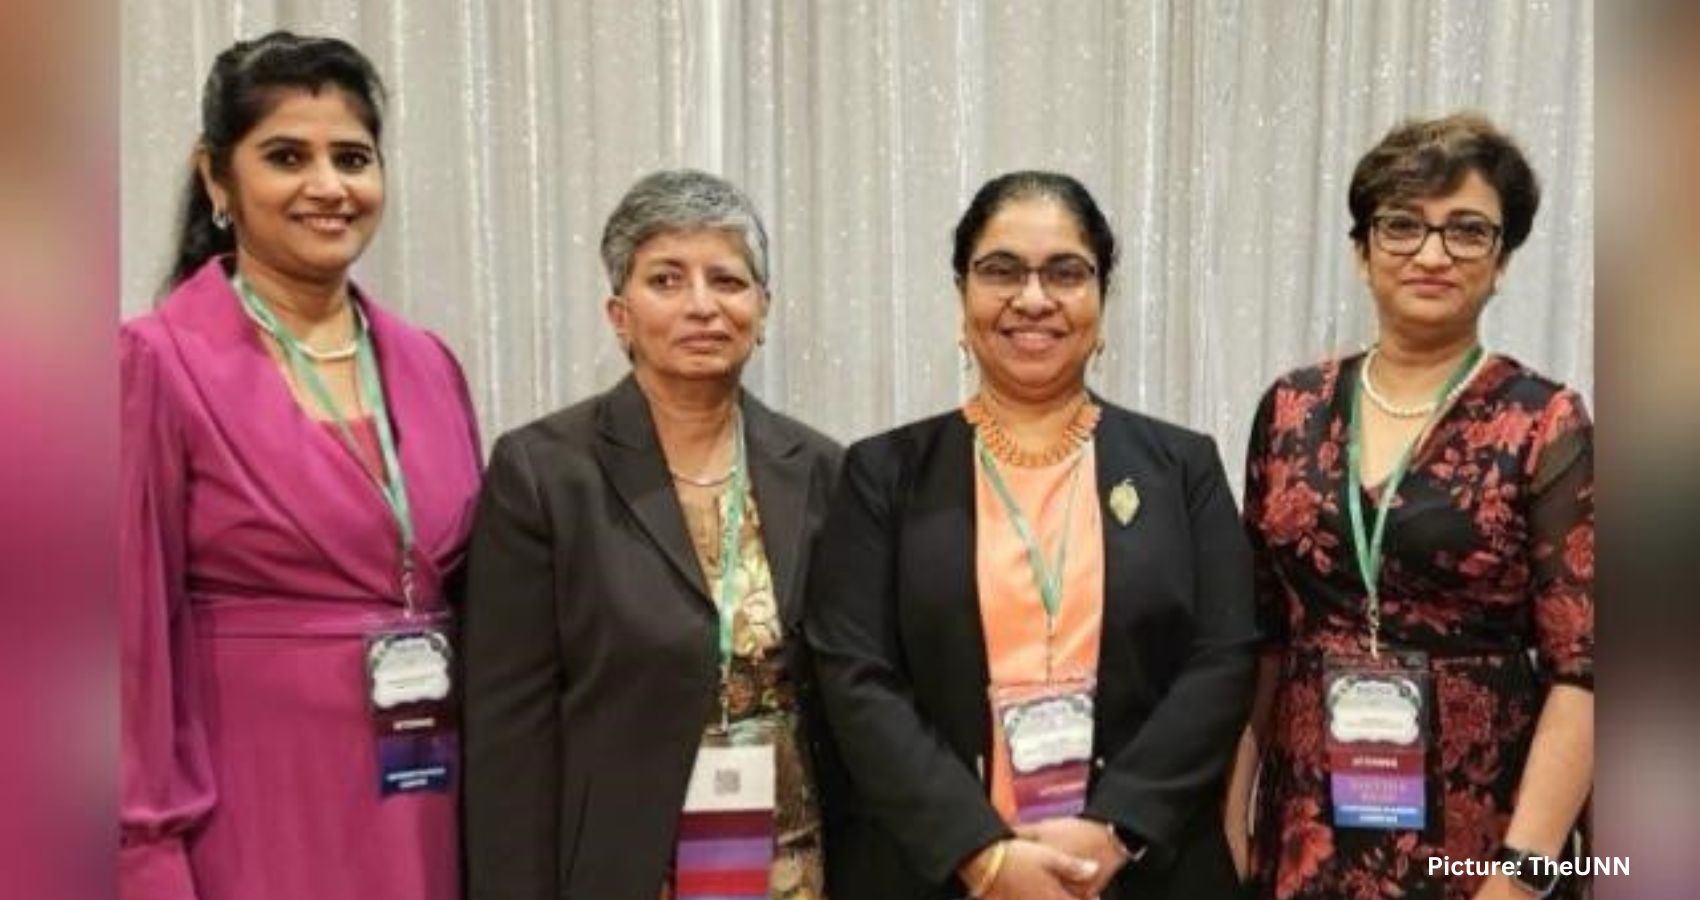 NAINA HOLDS 9TH BIENNIAL CONFERENCE IN ALBANY, NY ON OCTOBER 4TH AND 5TH